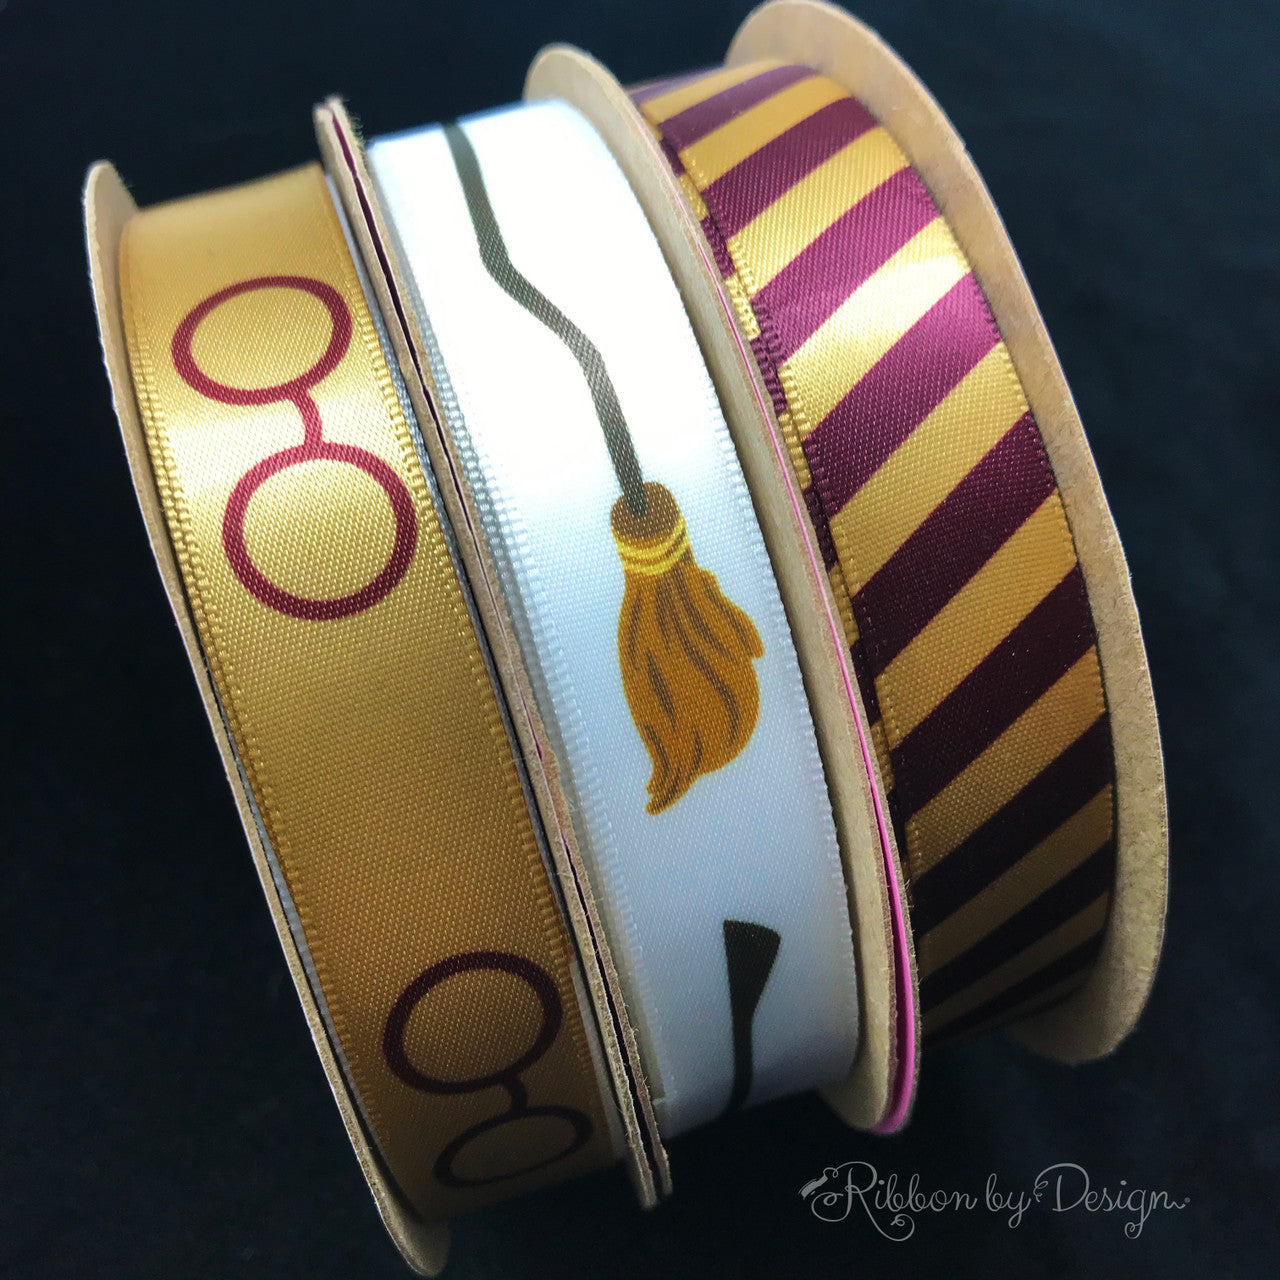 Mix and match our Wizard Brooms with our gold and burgundy stripes and spectacles for a complete Wizard experience! Our ribbons are designed and printed in the USA